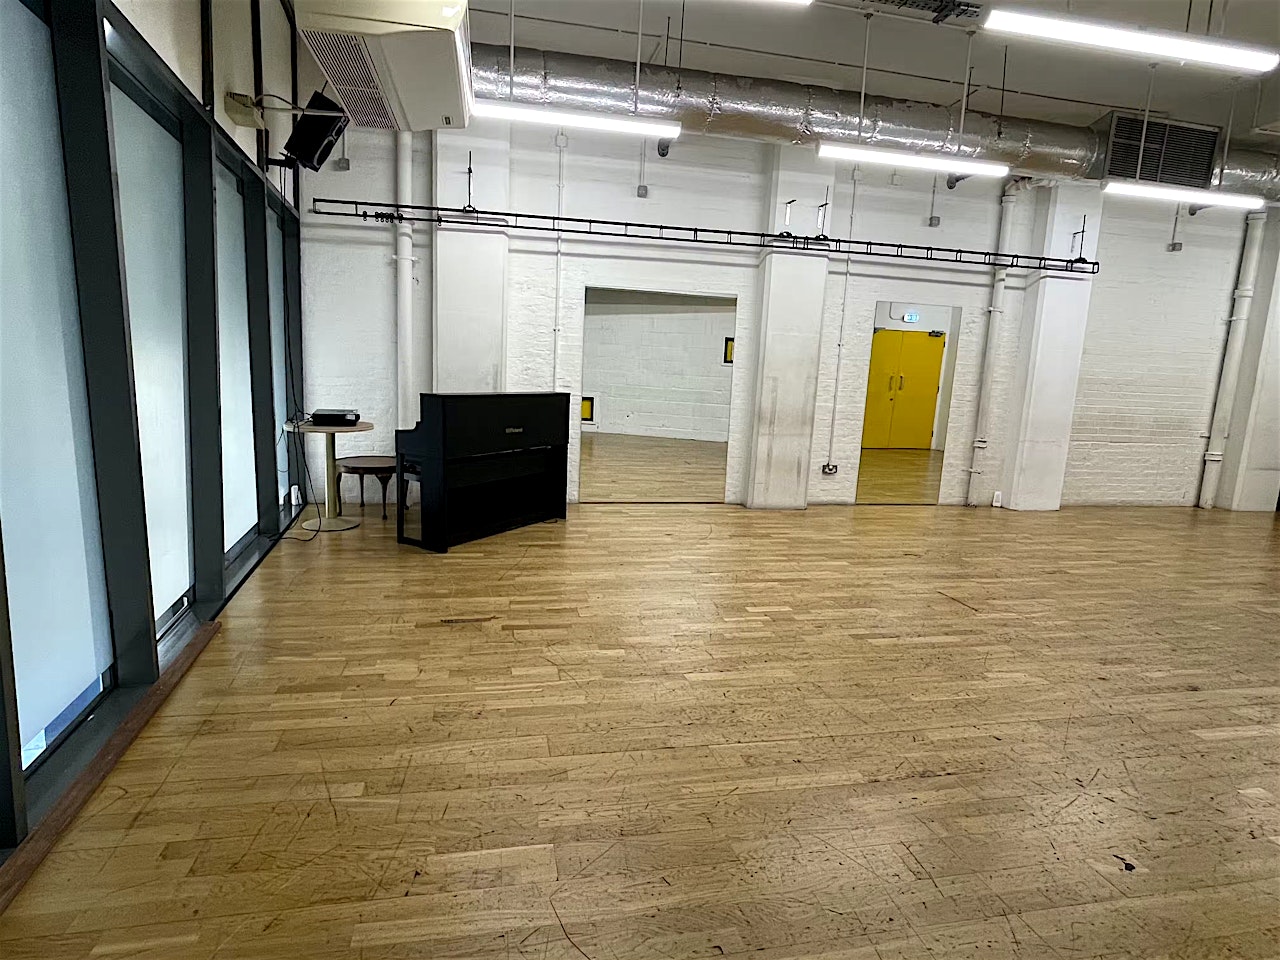 The rehearsal room at Seven Dials Playhouse in Covent Garden, central London